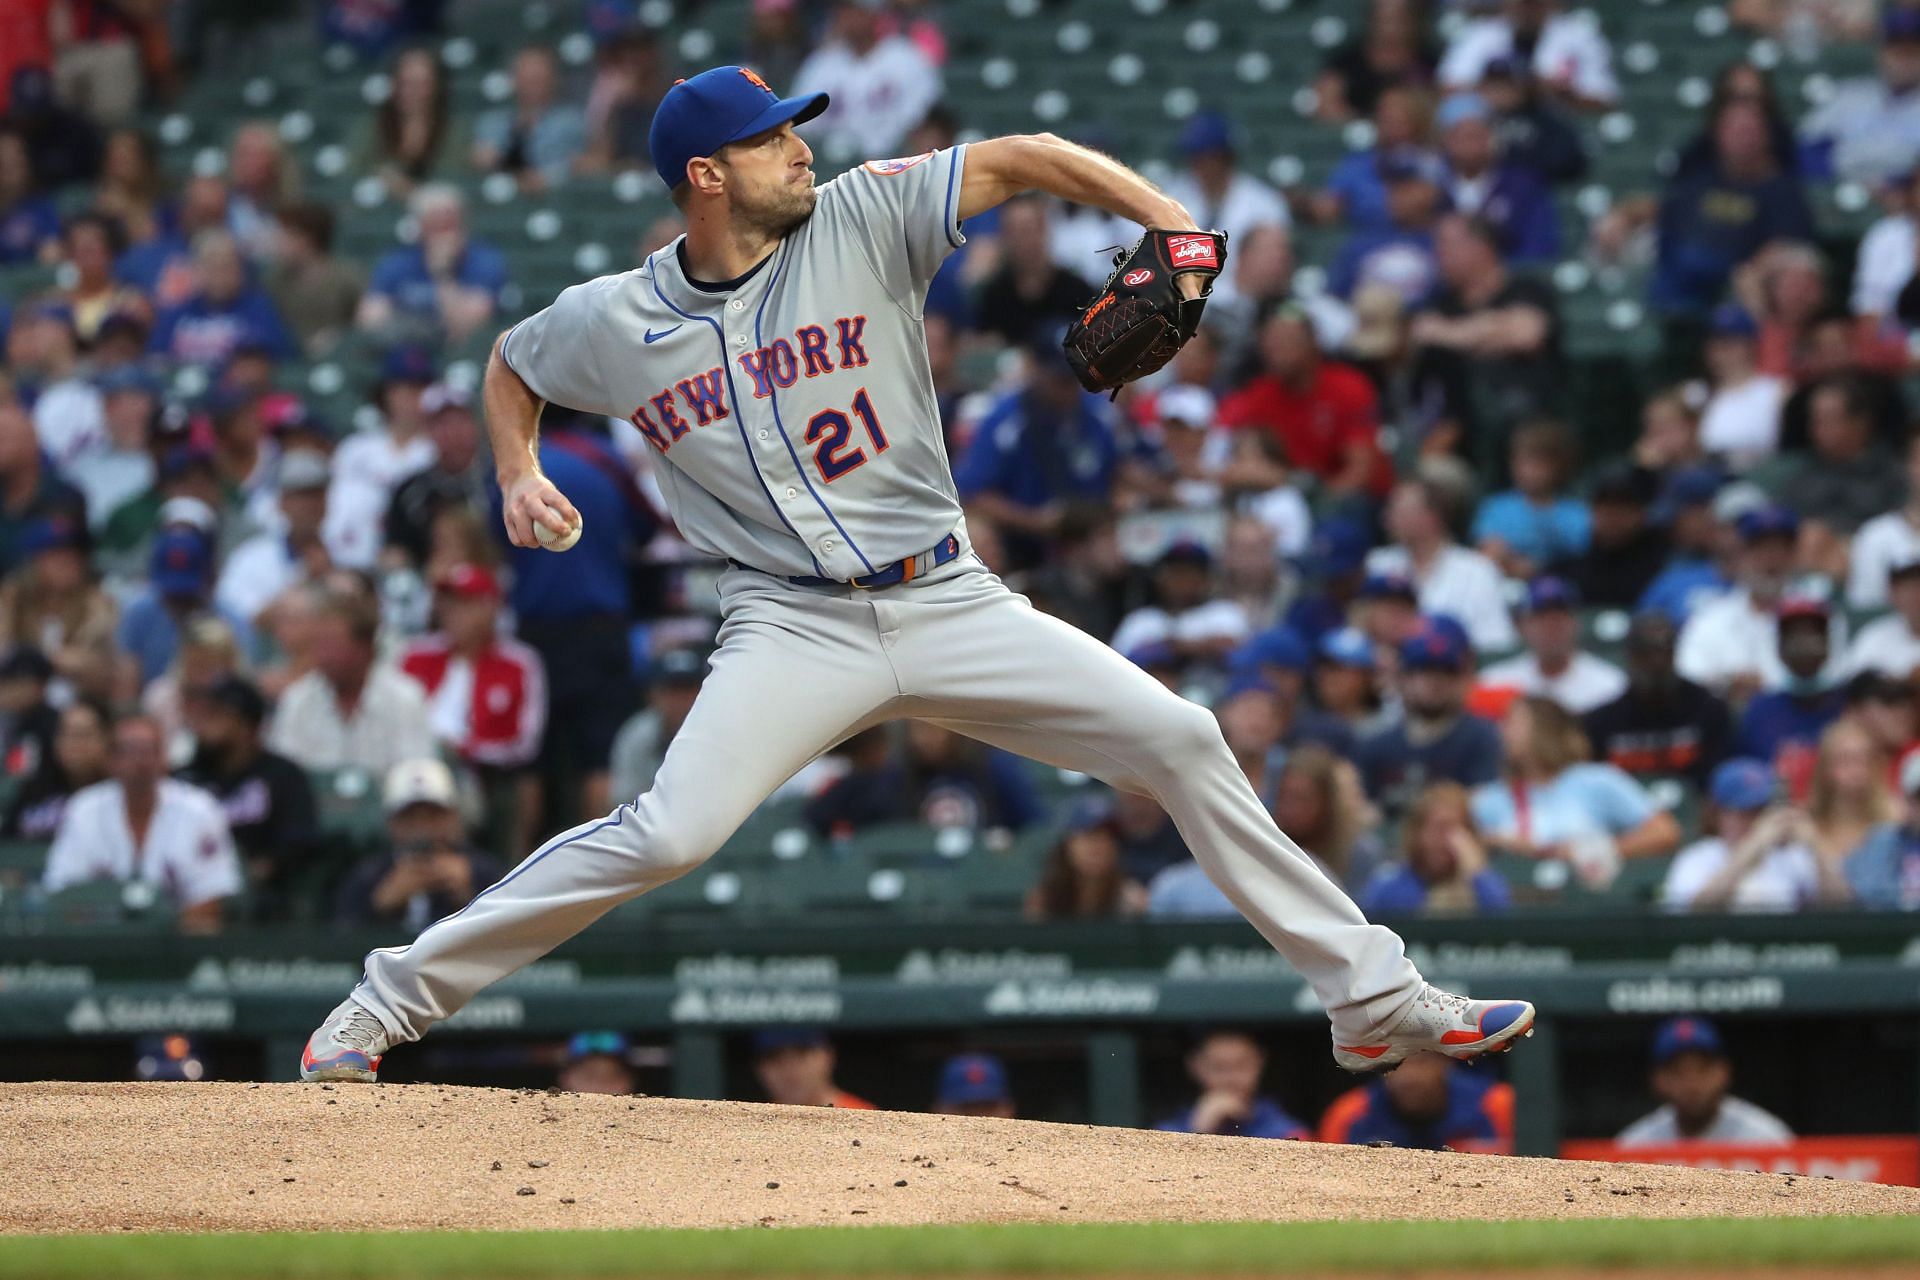 Max Scherzer pitches in the first inning during game two of a doubleheader between the New York Mets and the Chicago Cubs